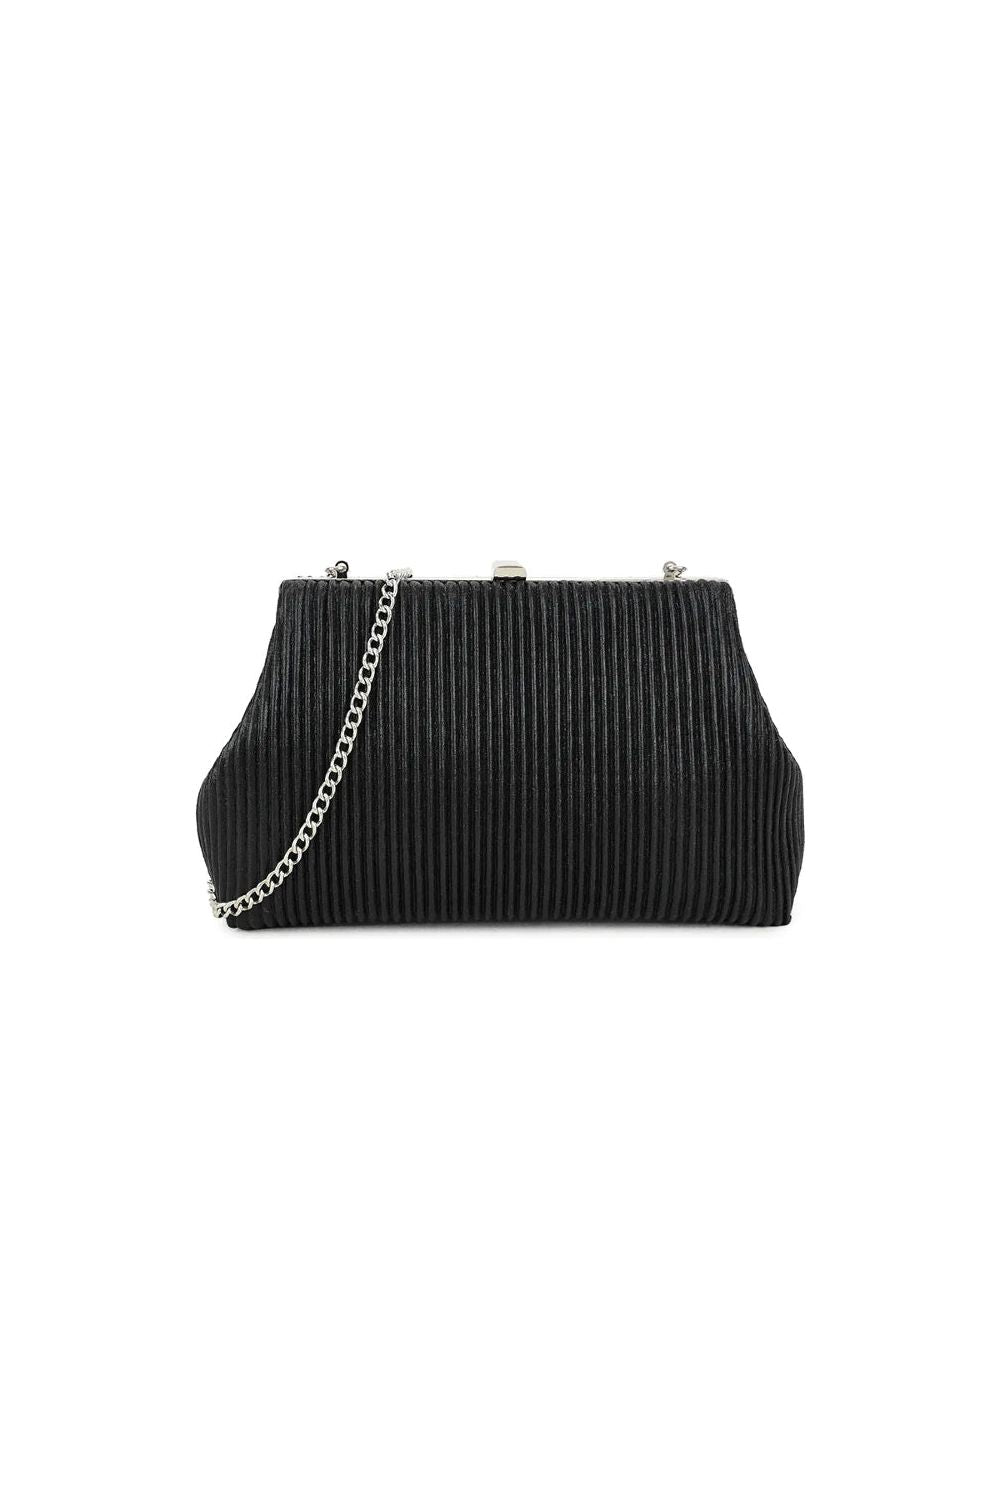 Black Glitter Clutch Bag With Removable Chain ALZ3044